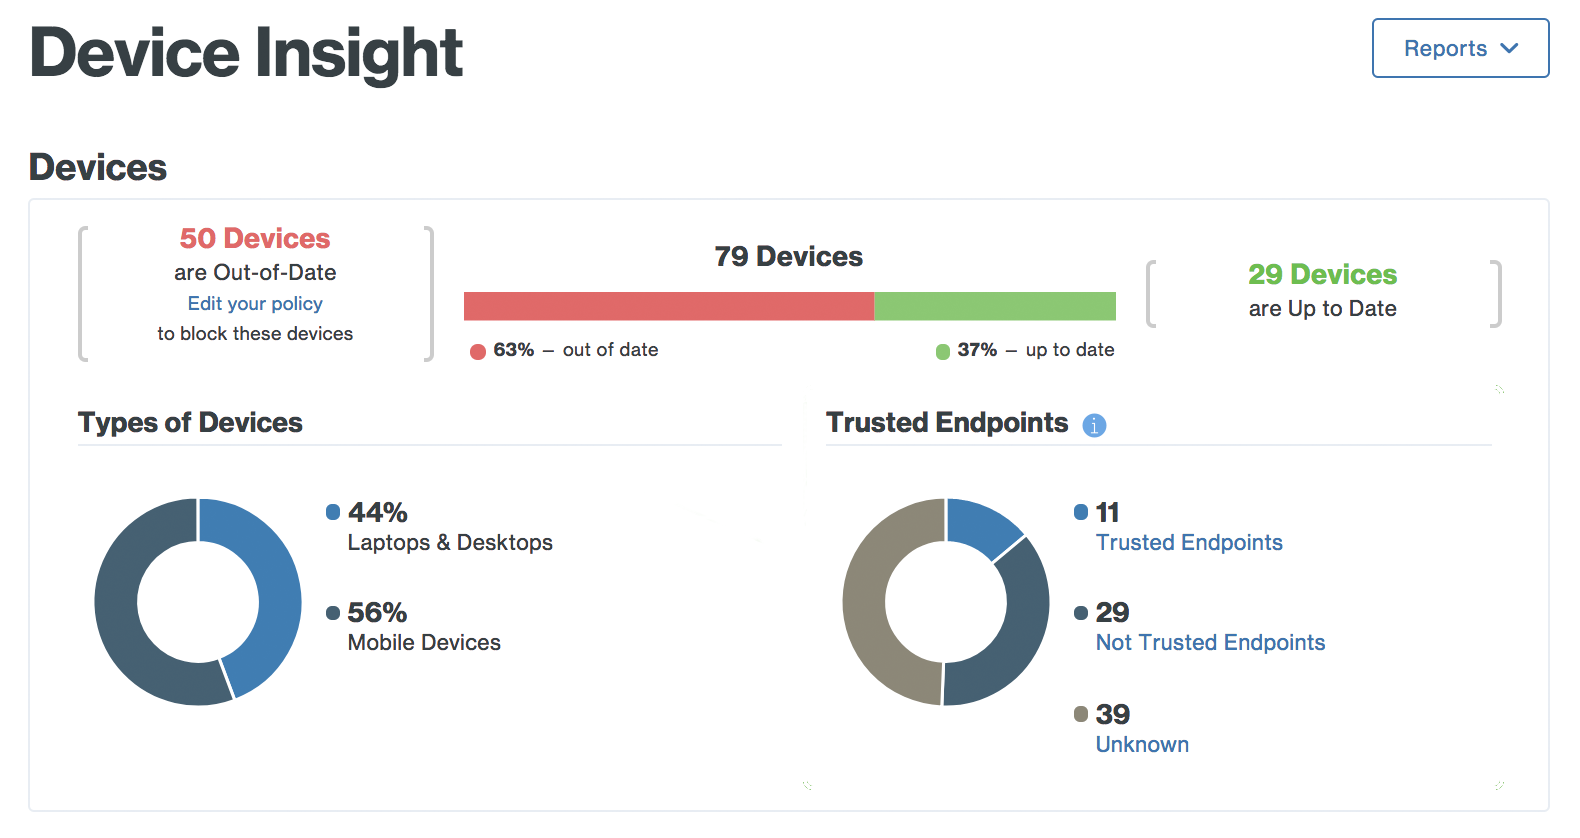 Trusted Endpoints in Device Insight